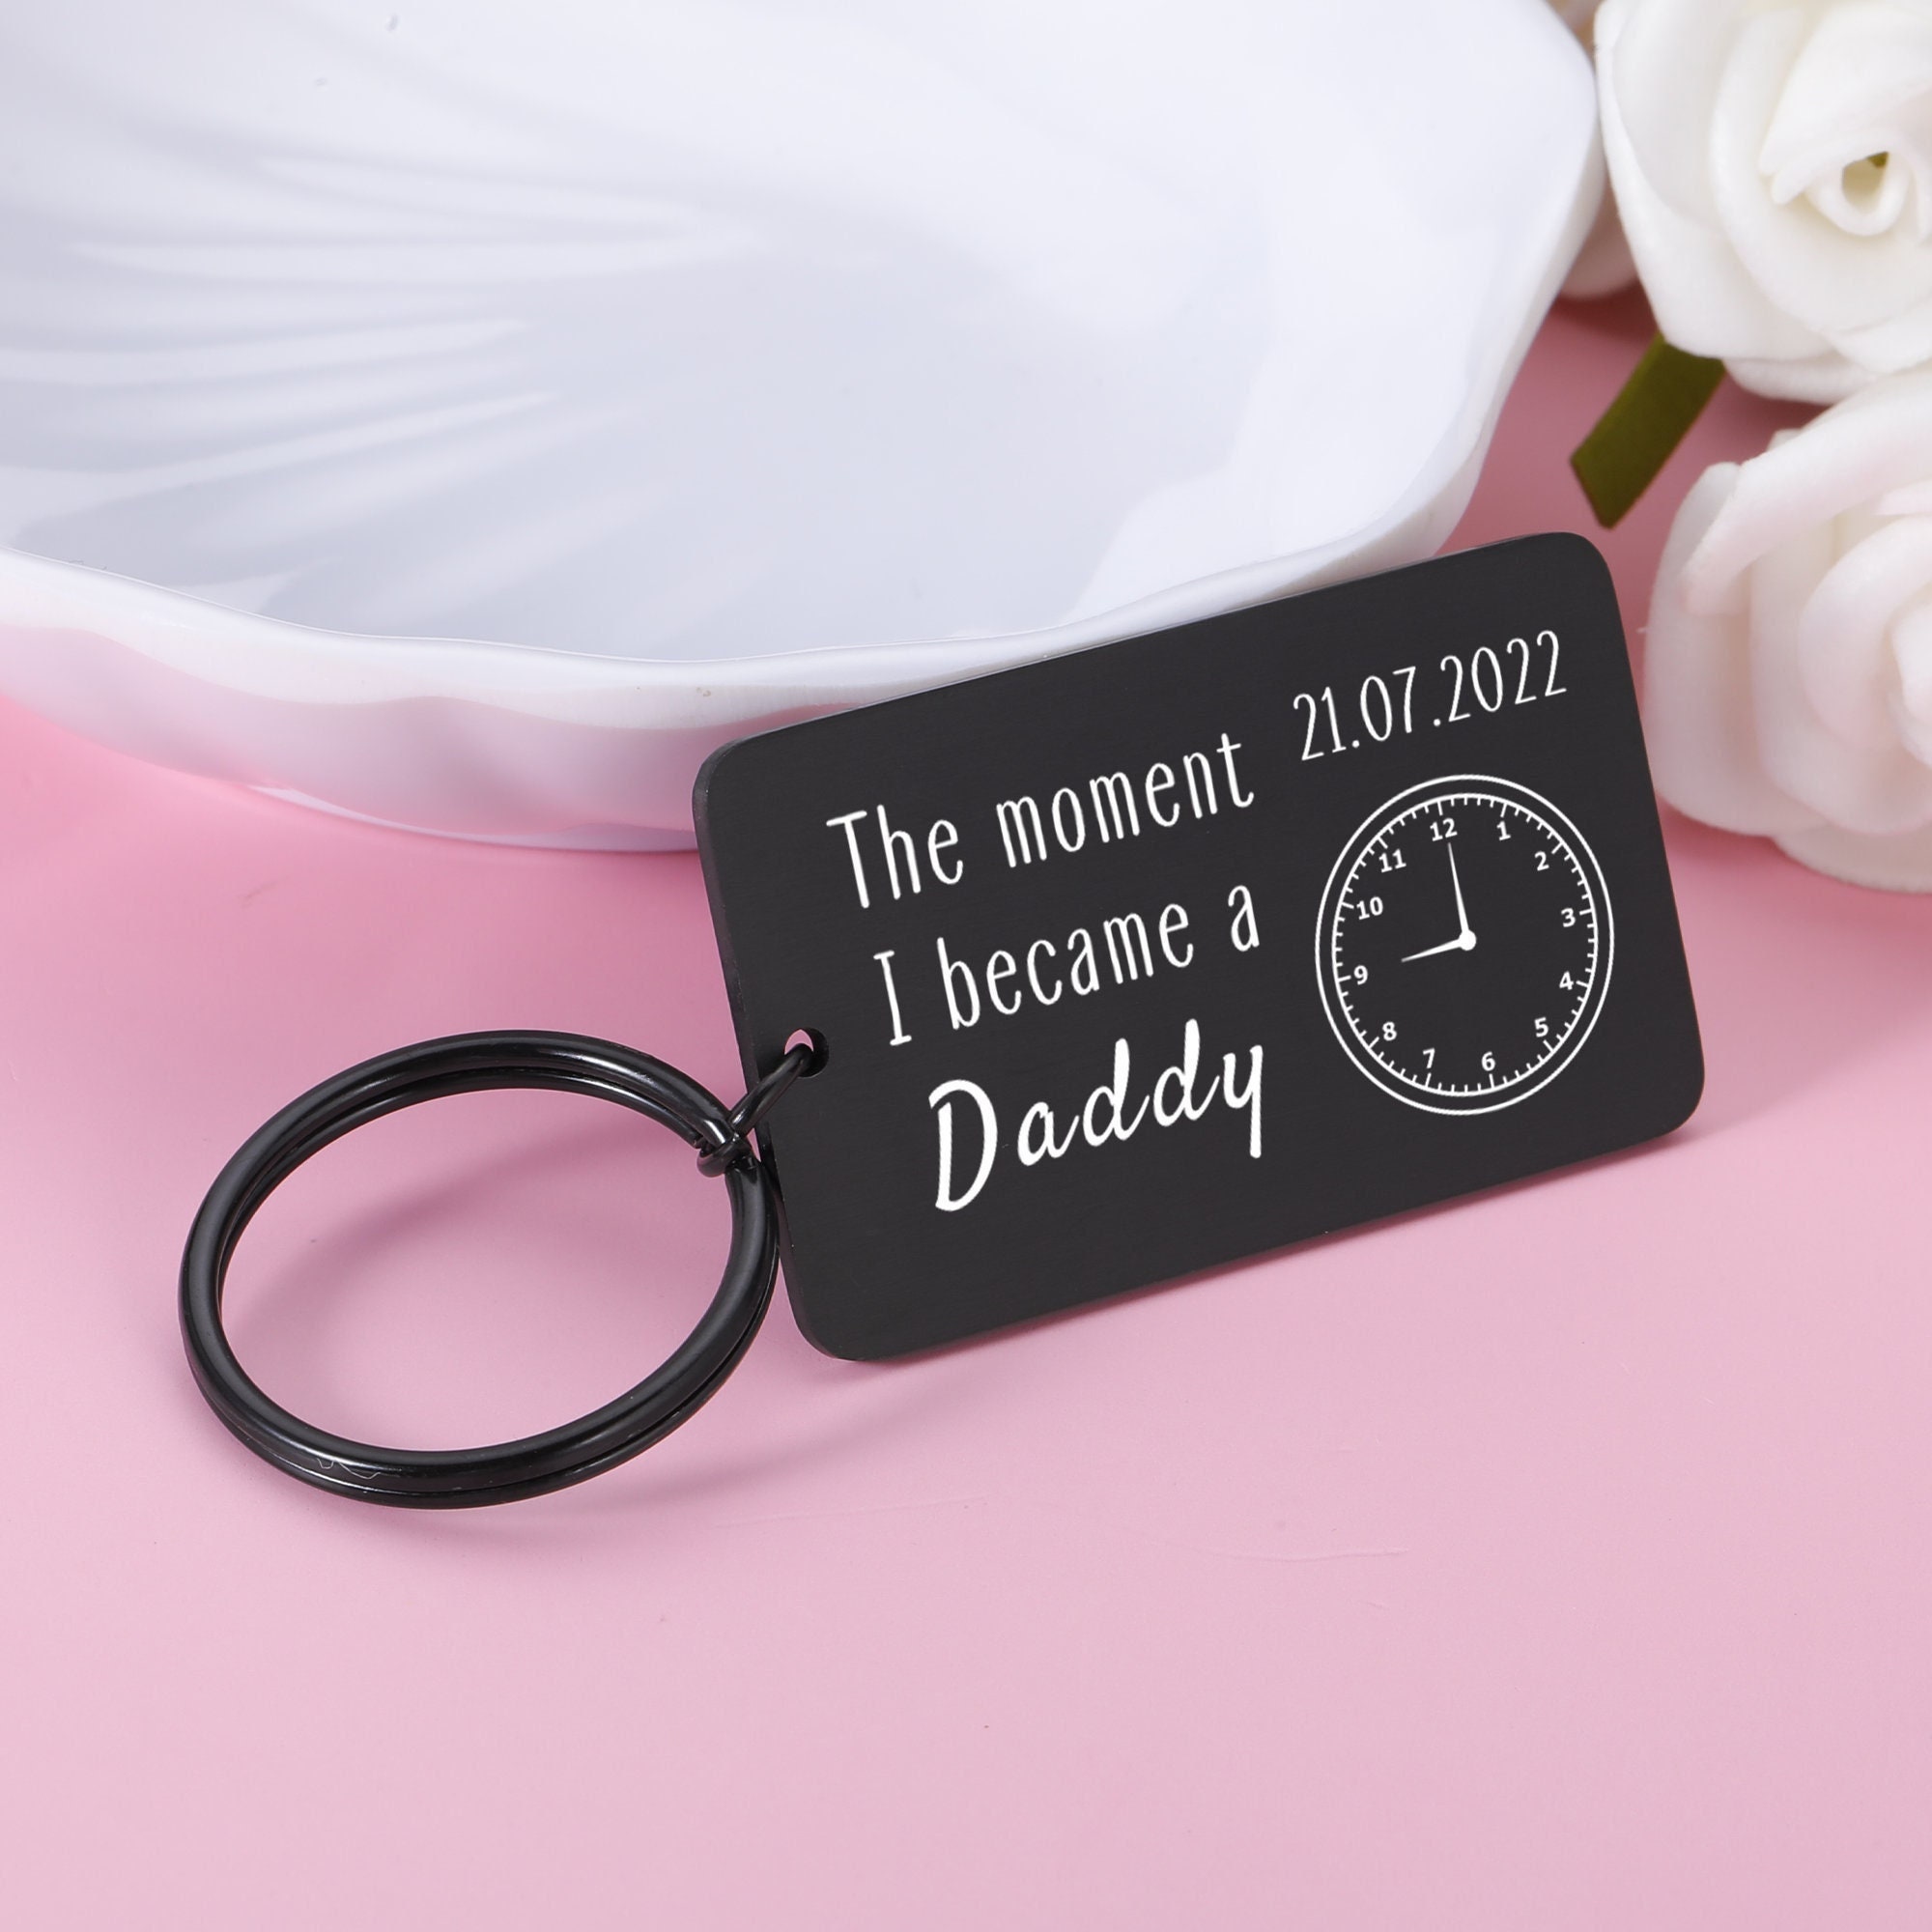 New Town Creative Personalized Black Leather Key Chain - Best Gift for Dad,  Father, Boyfriend, Groomsmen, Men (Black Keychain Only)